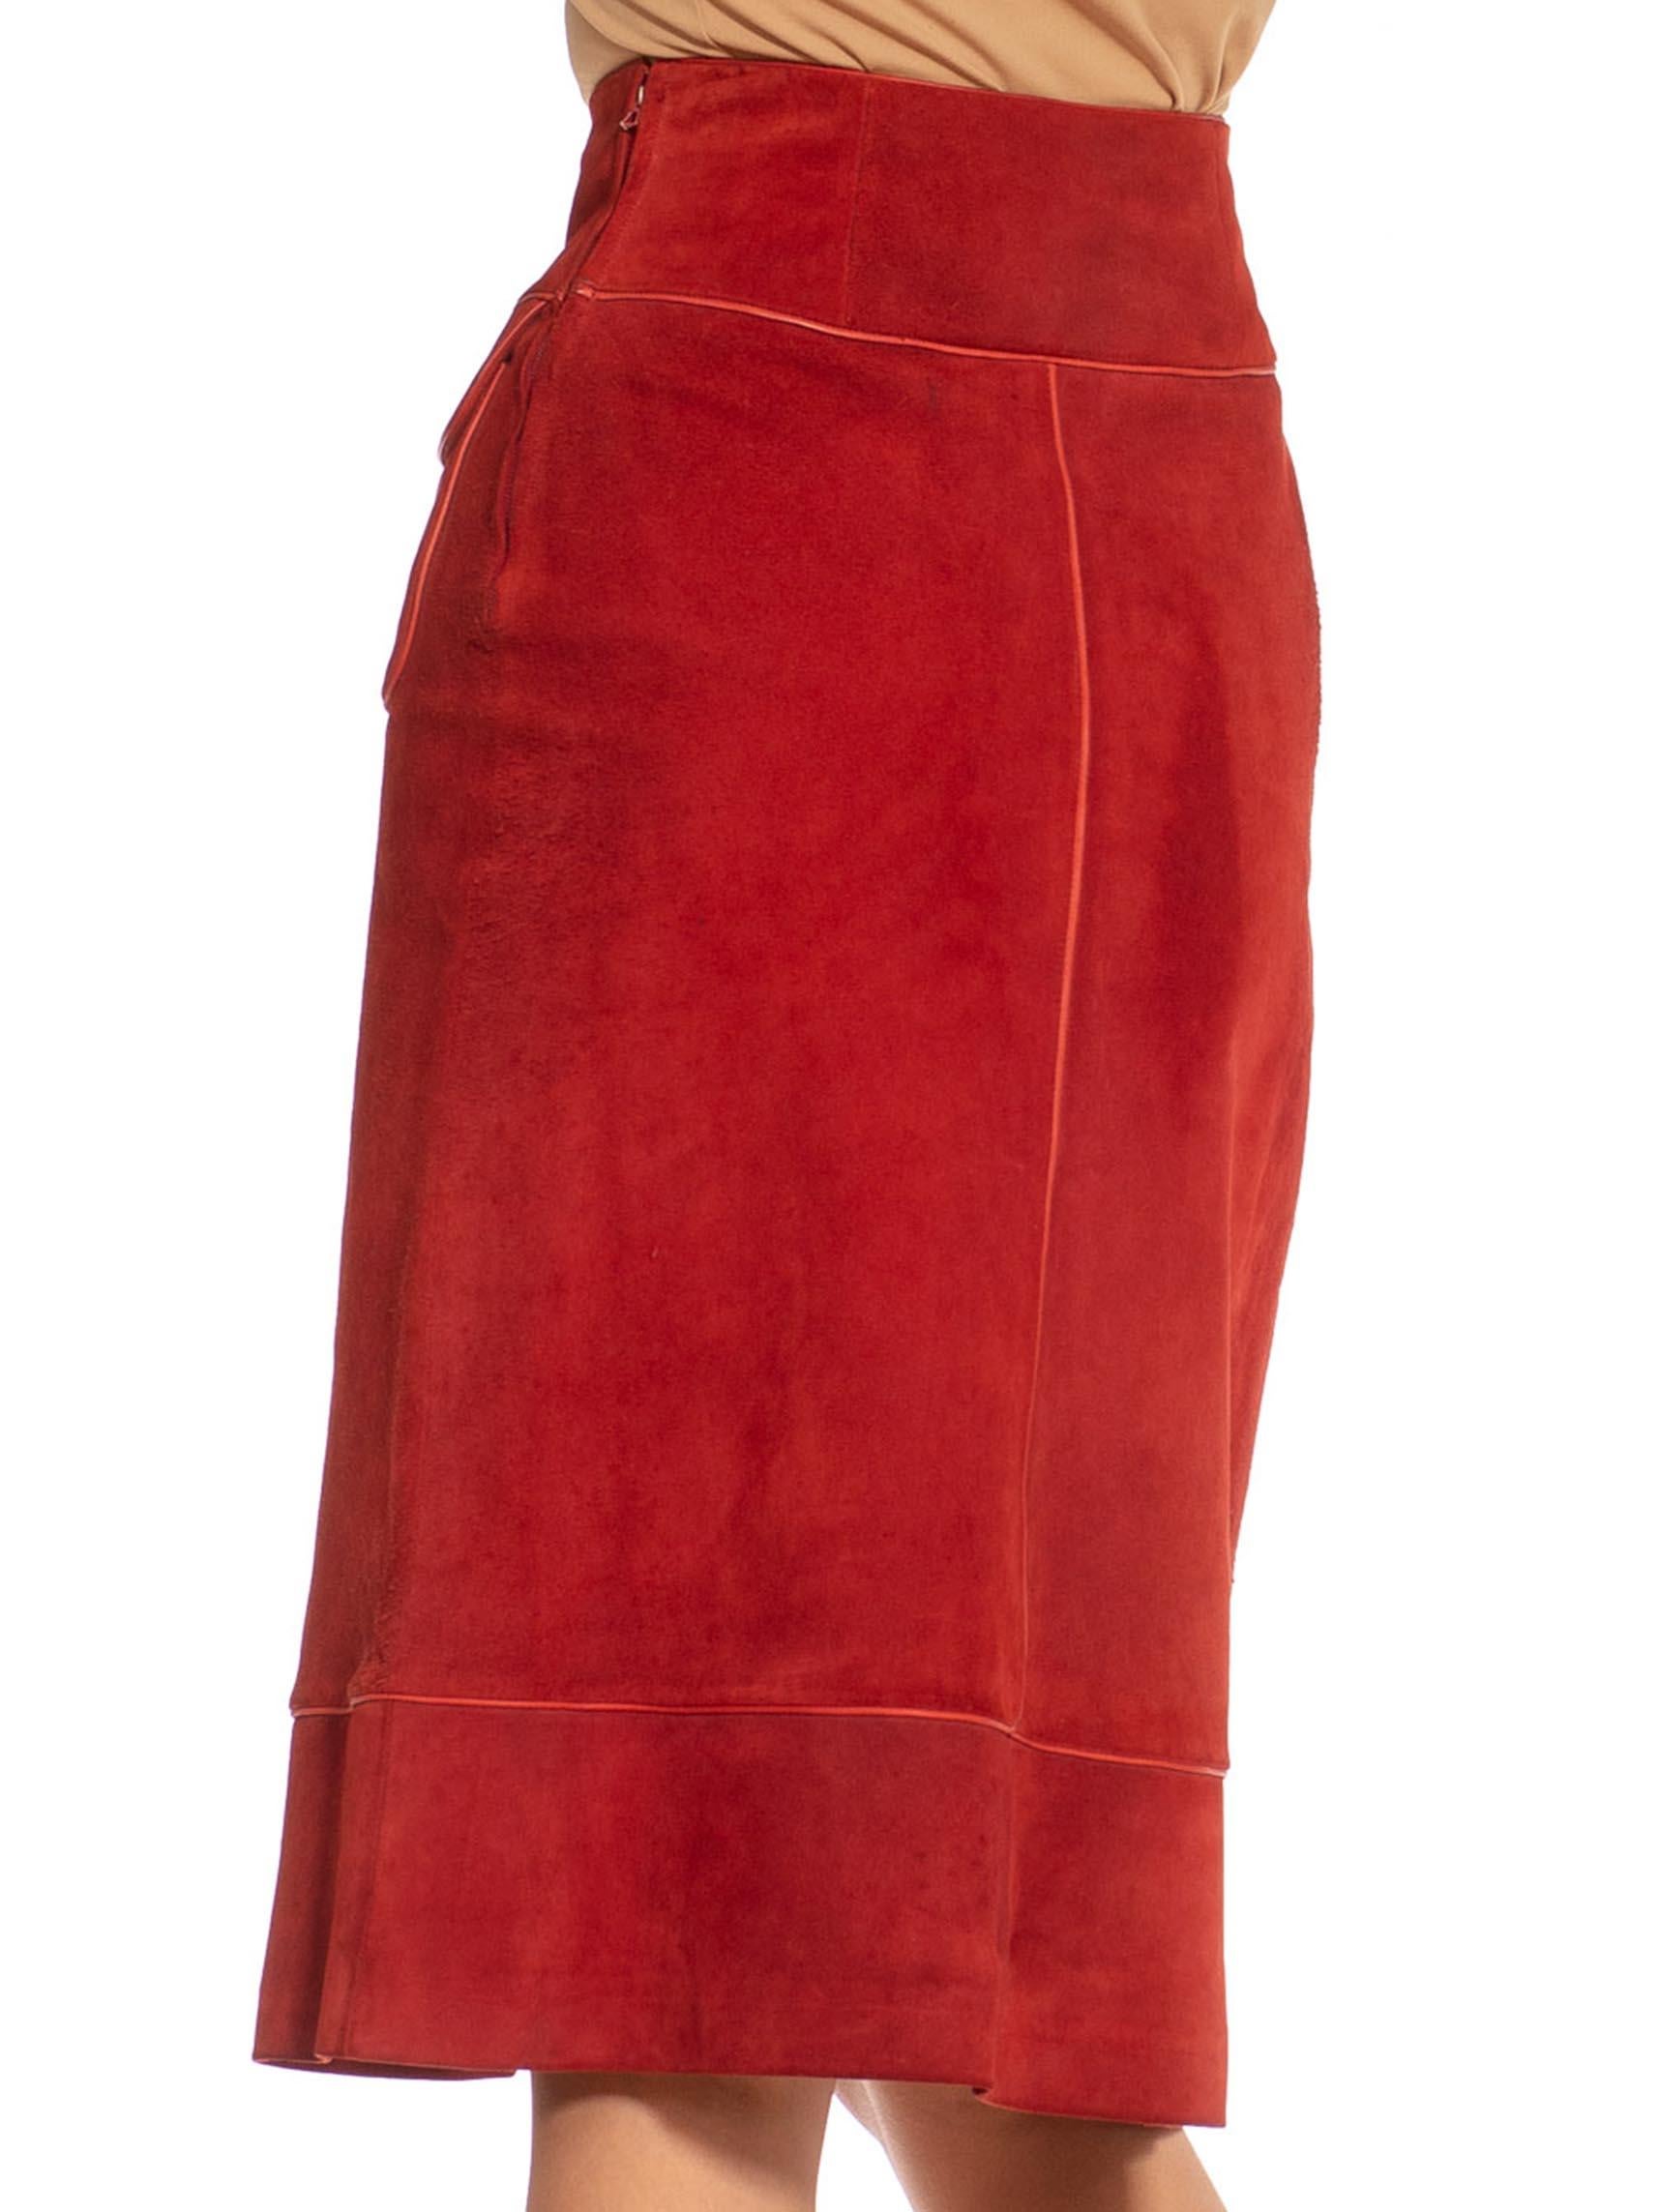 1990S GUCCI Burgundy & Gold Suede Midi Buckle Skirt 1